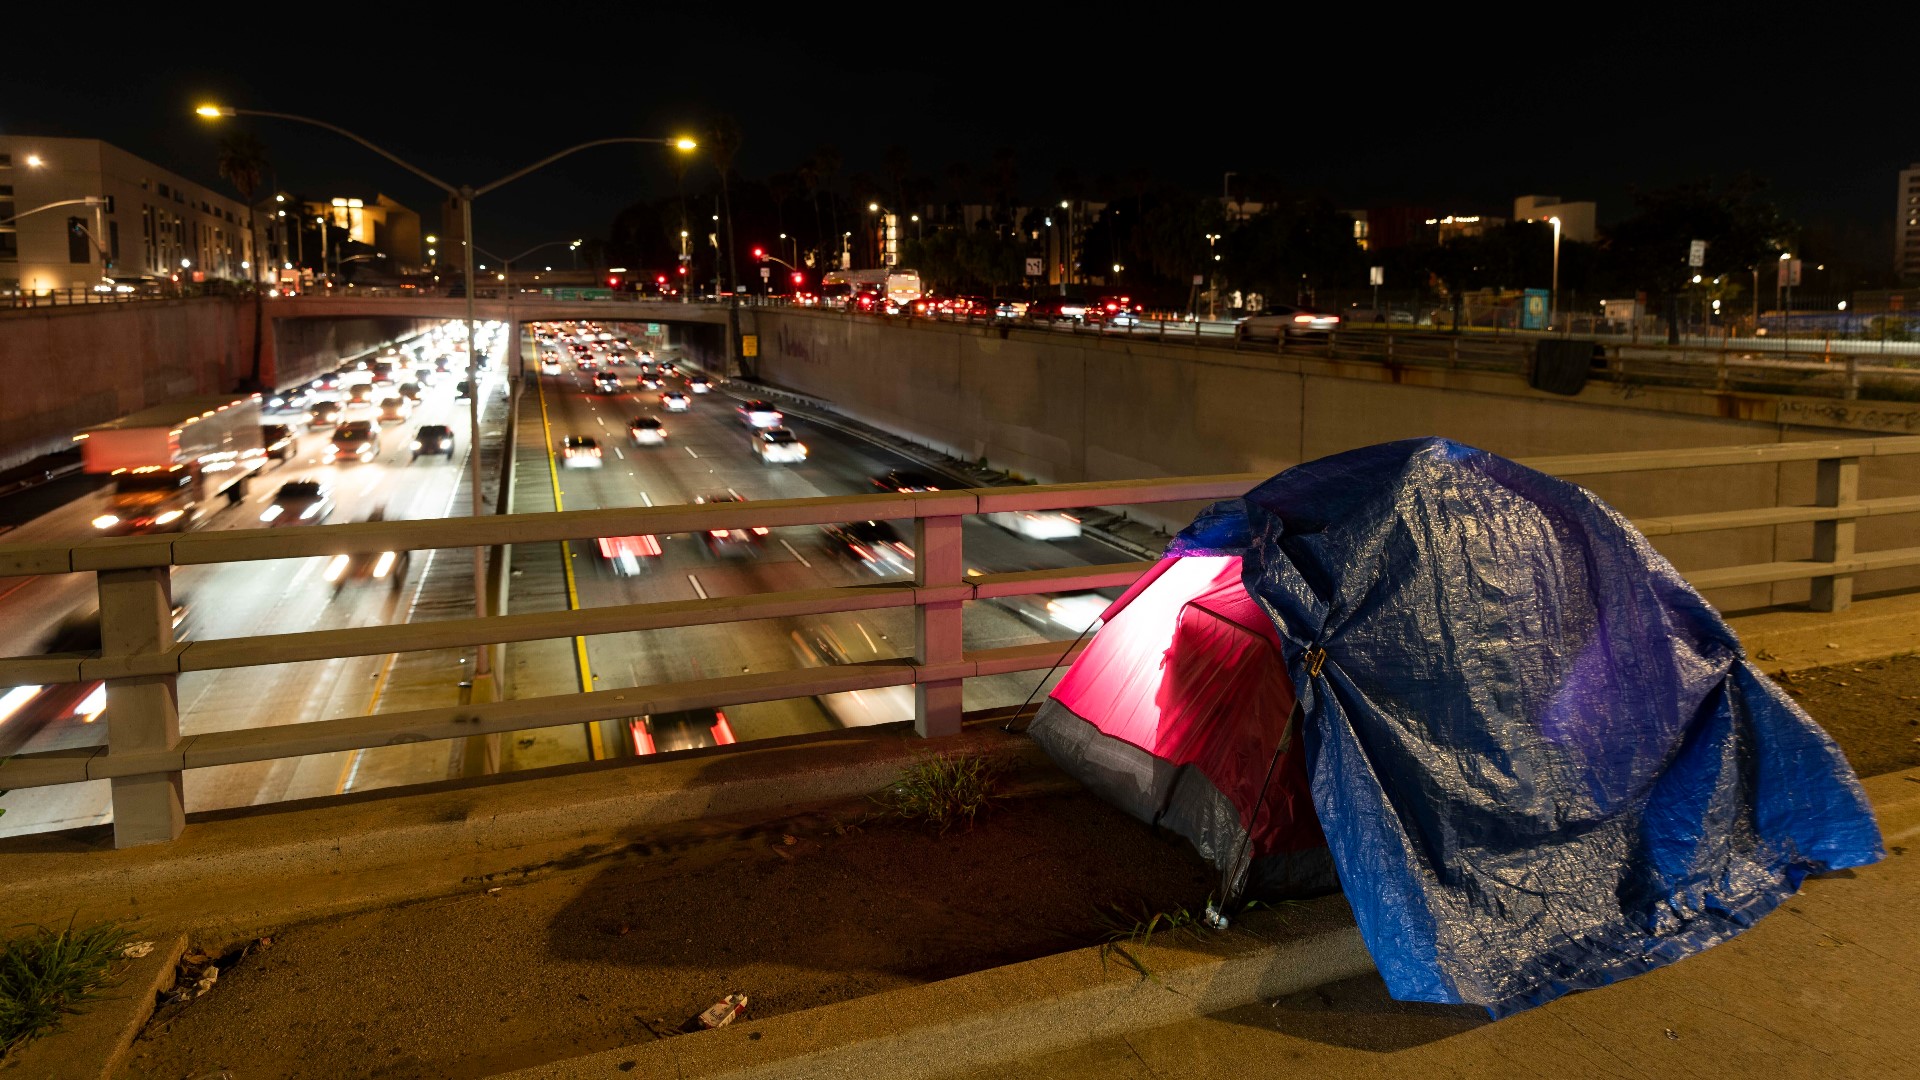 Homelessness is on the rise across the U.S. and with it, so are the number of encampments appearing in cities of all sizes.